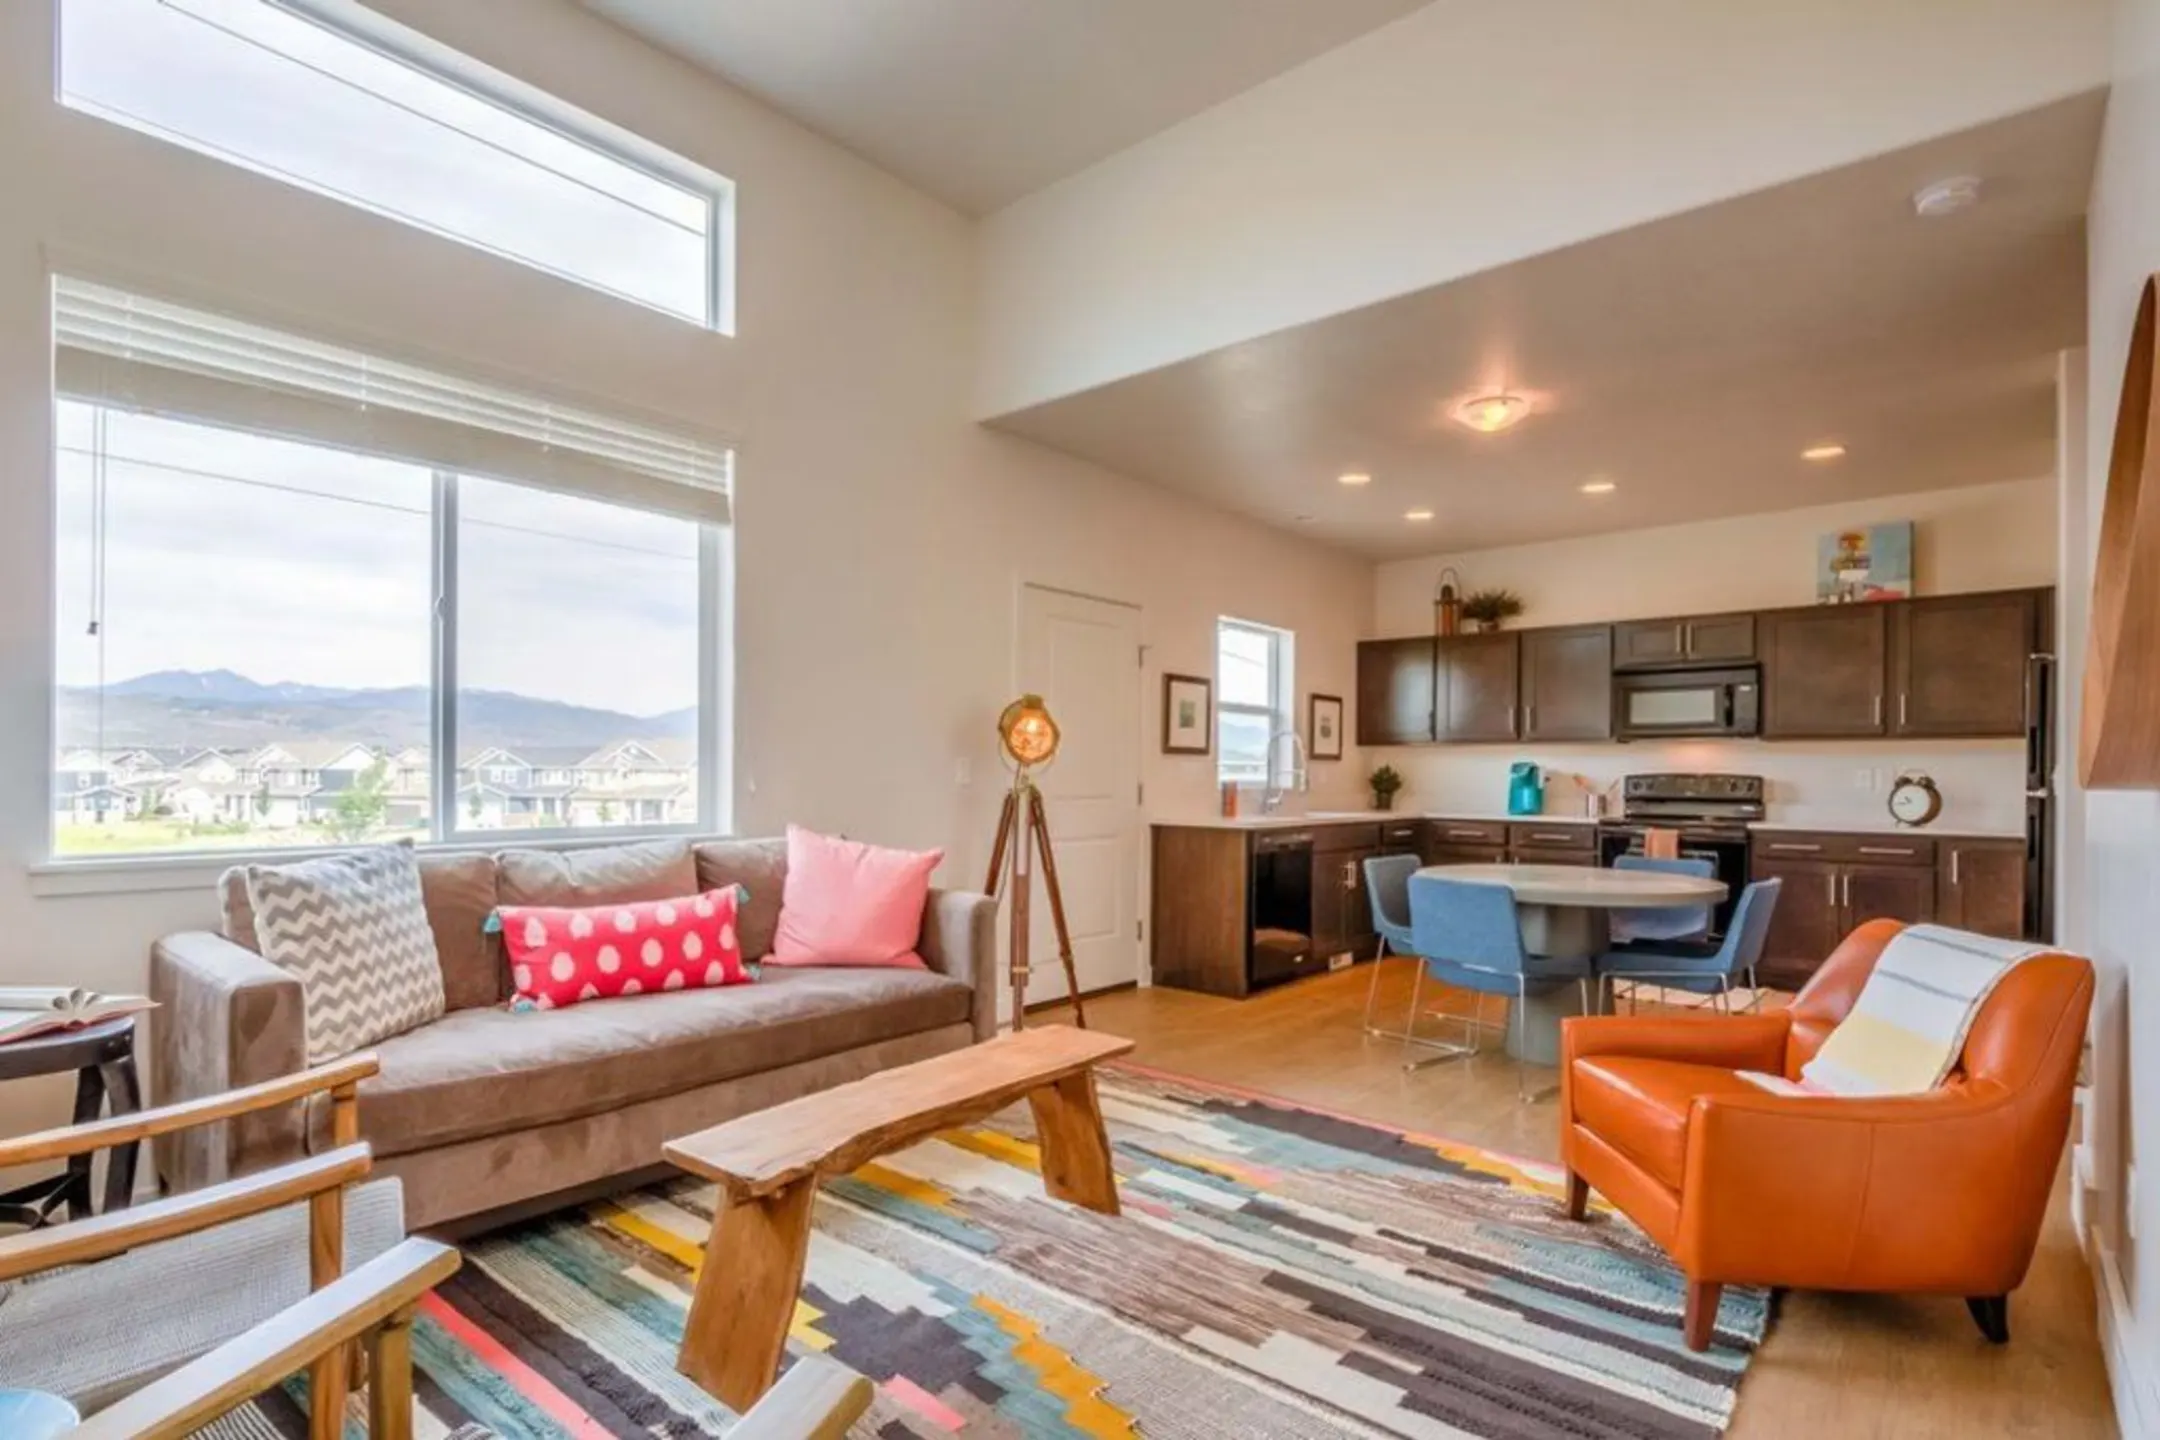 Living Room - Rockwell Village Townhomes - Bluffdale, UT